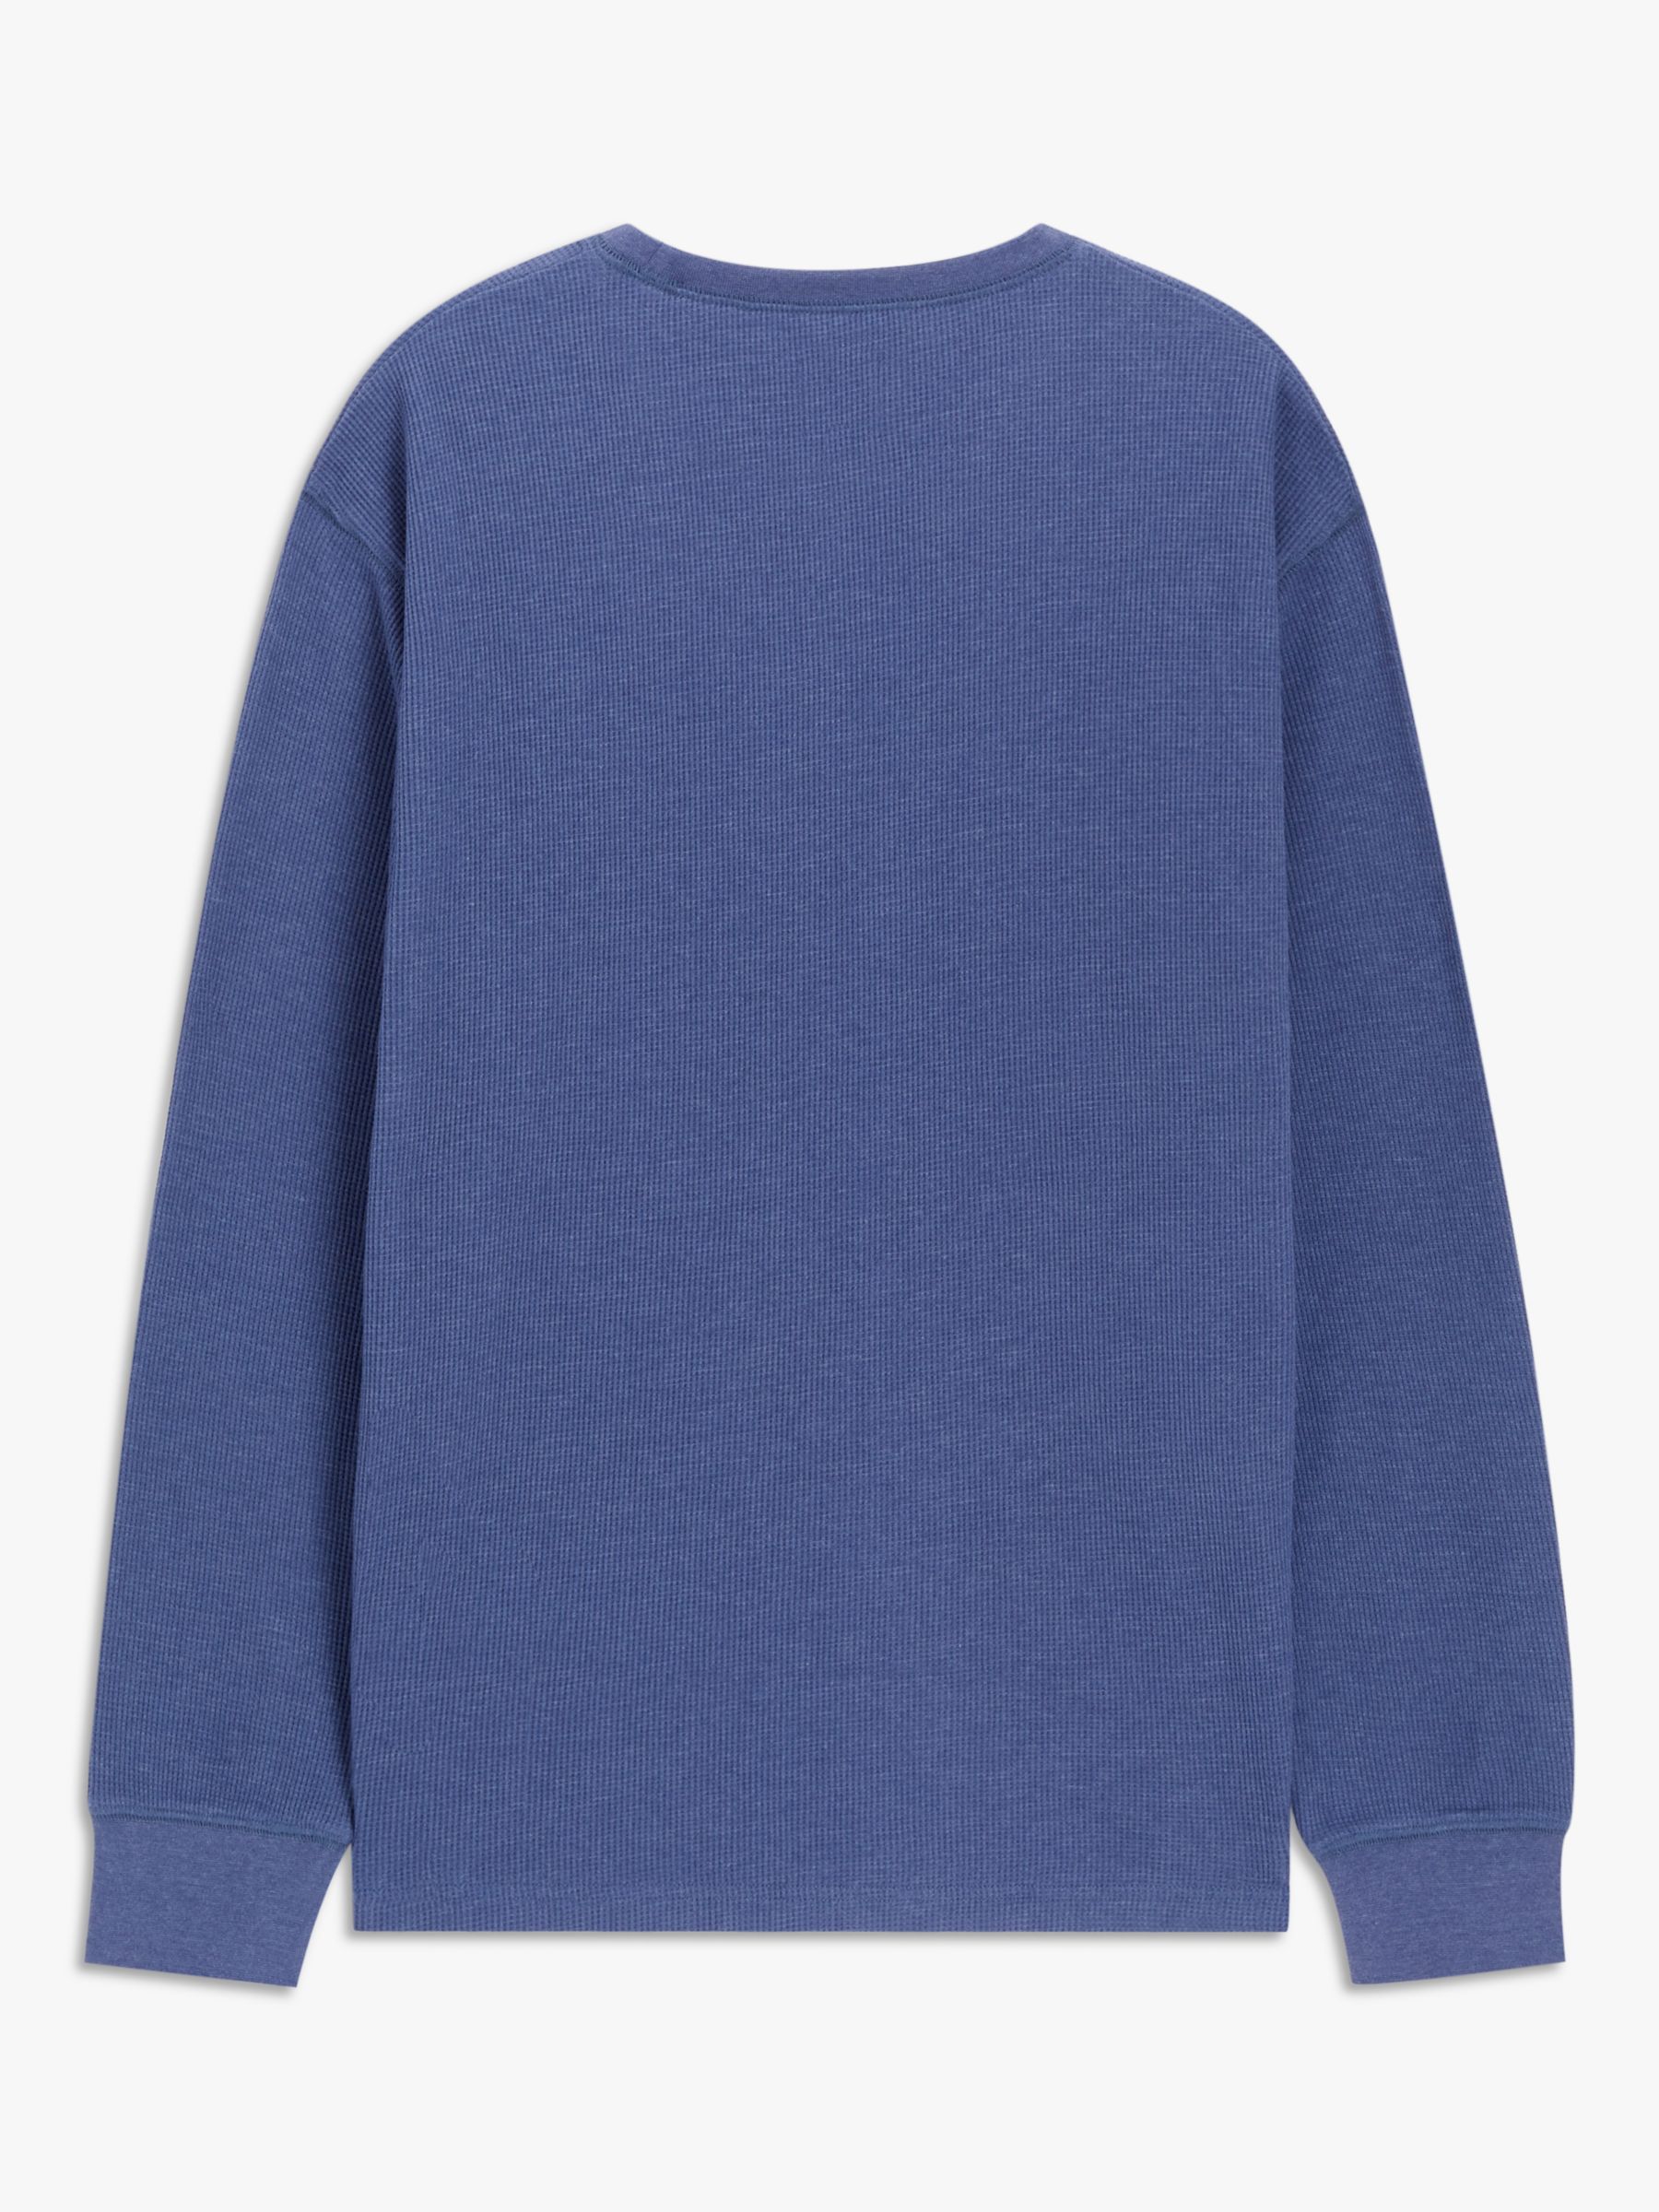 John Lewis ANYDAY Waffle Cotton Blend Long Sleeve Lounge Top, Twilight Blue, L